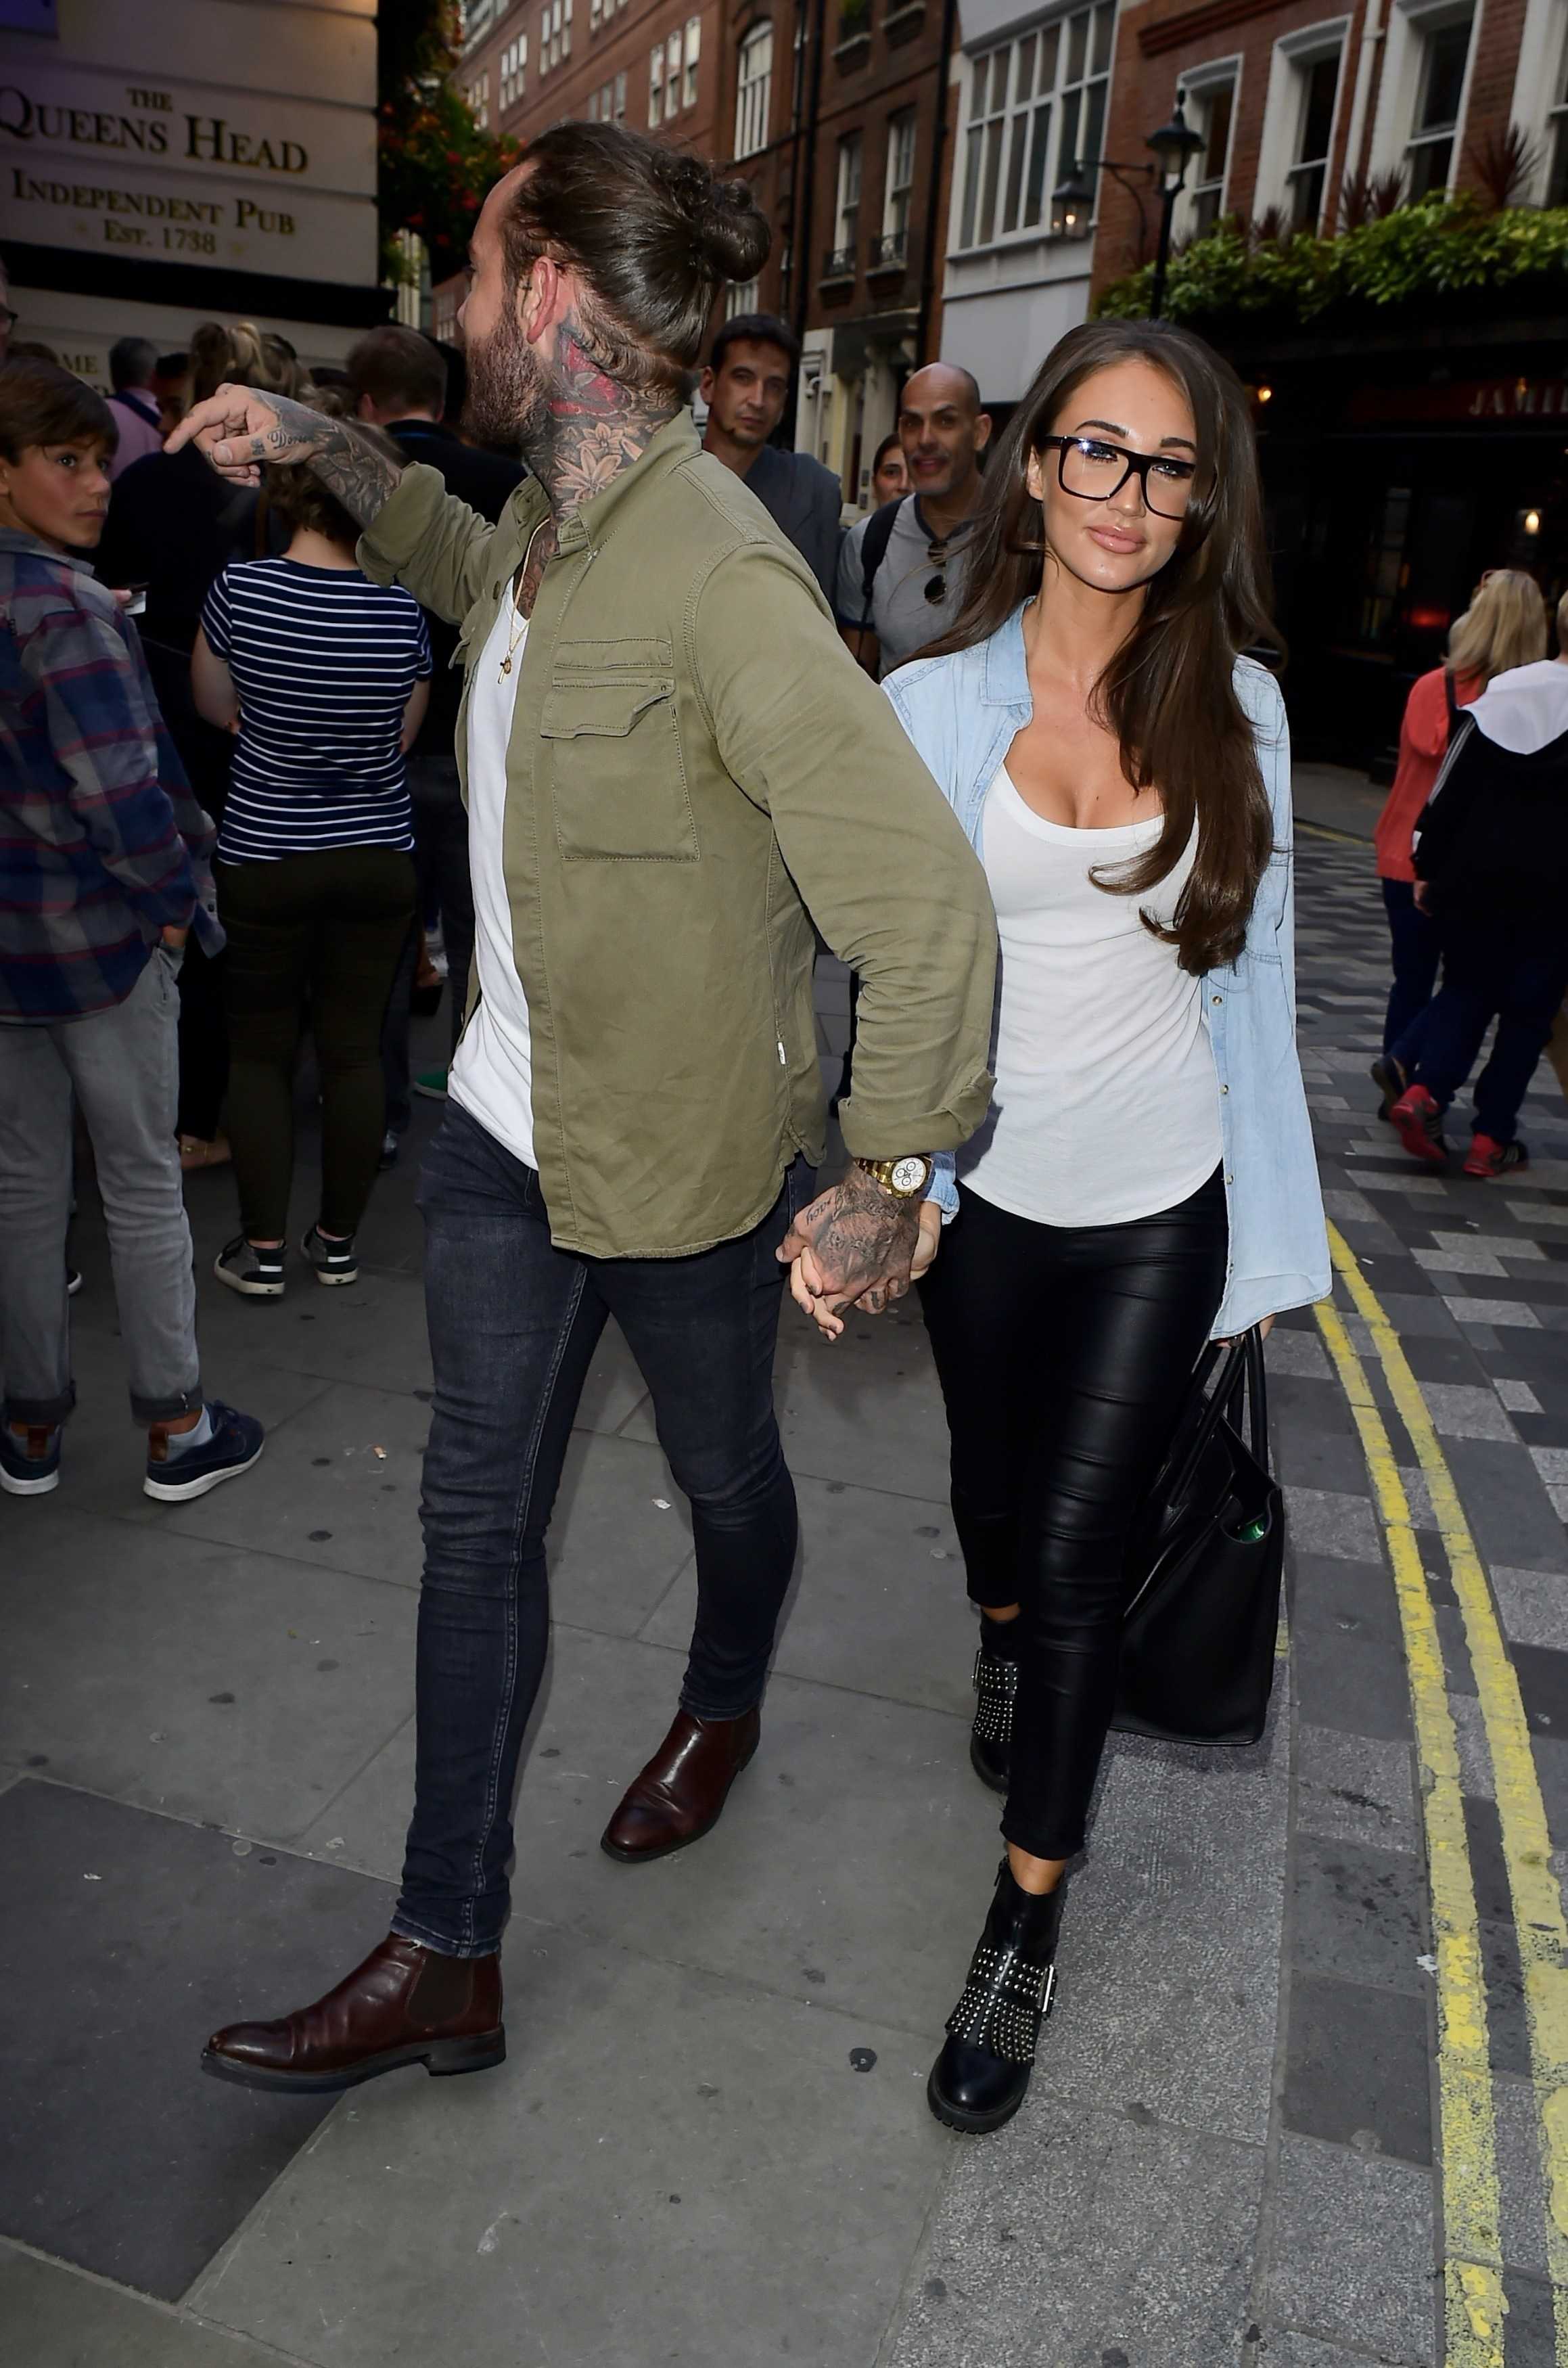 Megan McKenna at the Piccadilly Theatre